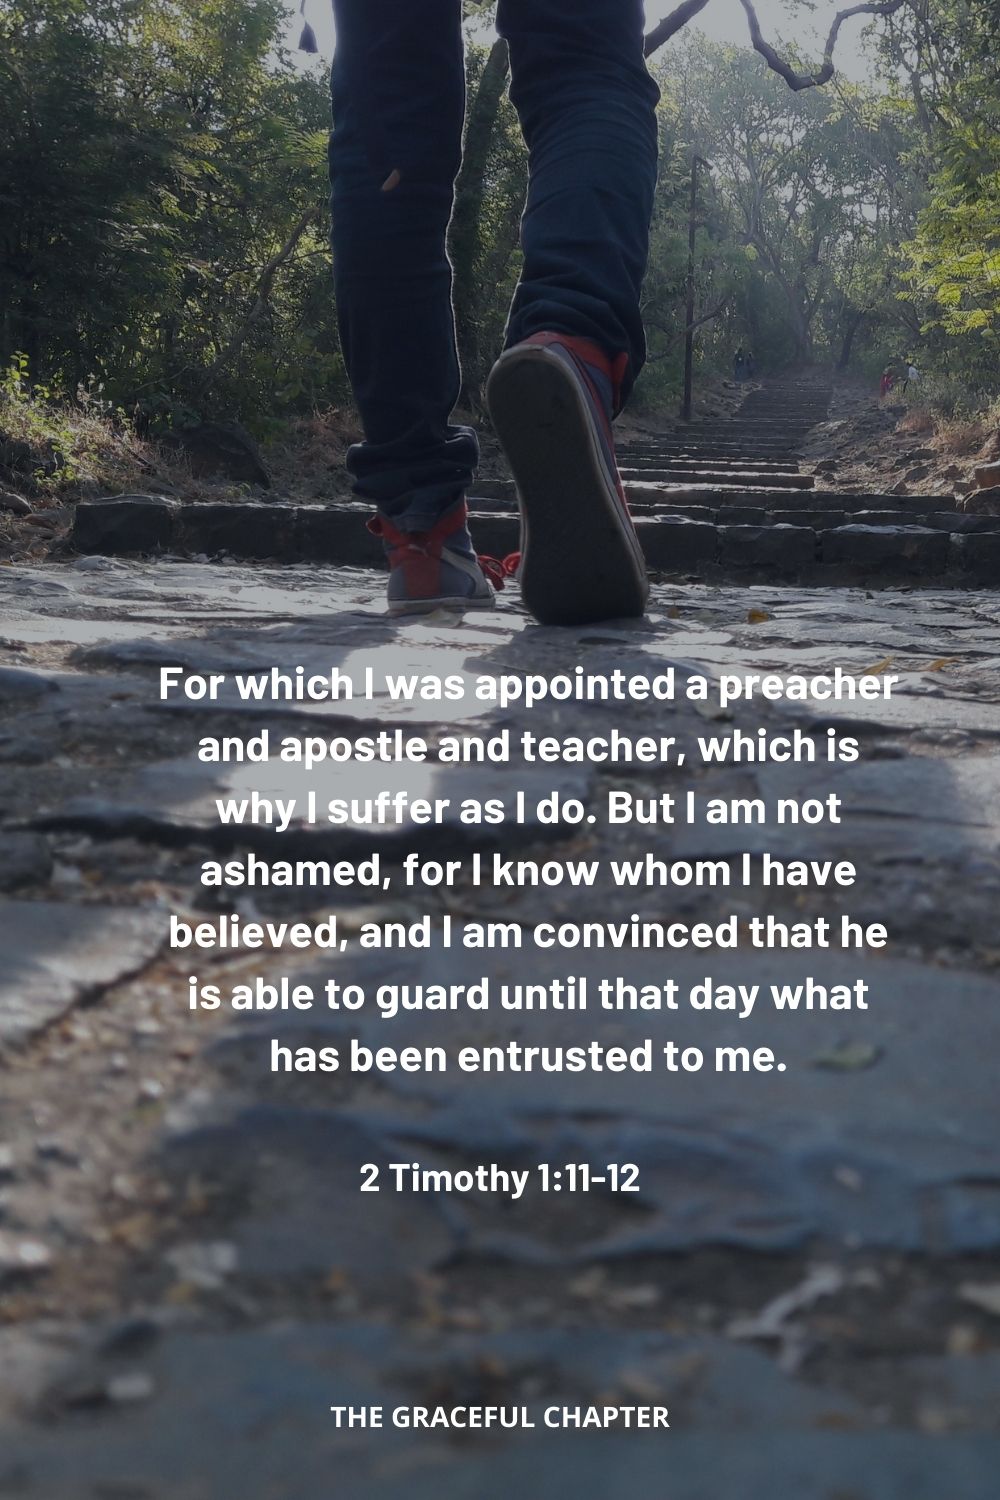 For which I was appointed a preacher and apostle and teacher, which is why I suffer as I do. But I am not ashamed, for I know whom I have believed, and I am convinced that he is able to guard until that day what has been entrusted to me. 2 Timothy 1:11-12